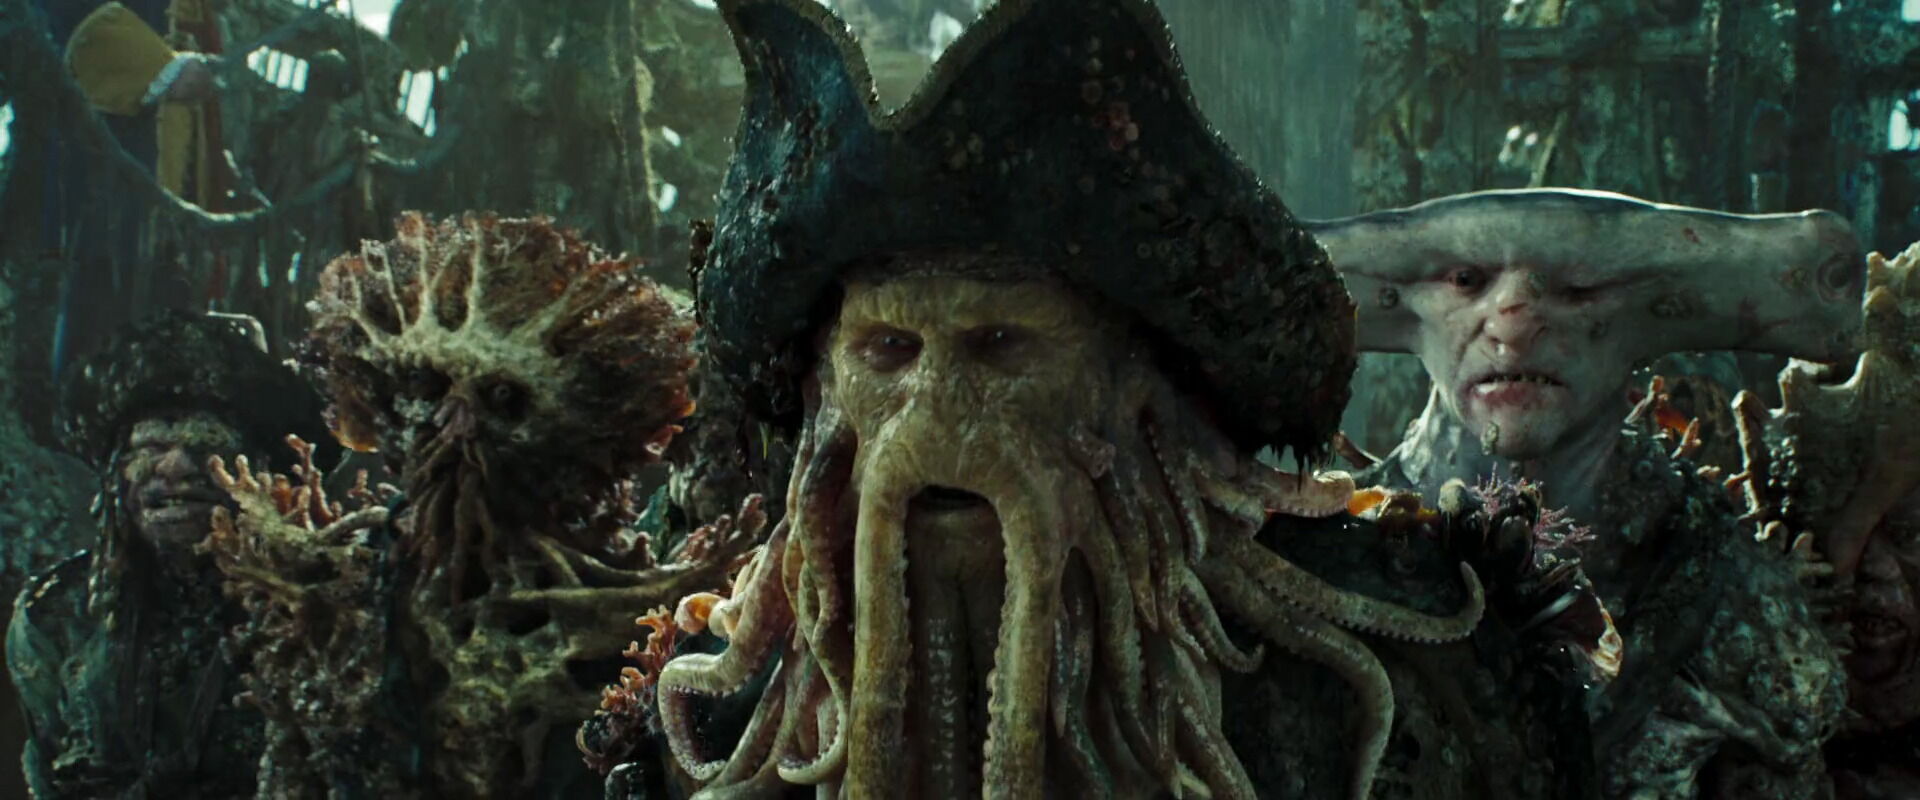 Davy Jones (Pirates of the Caribbean), Heroes and Villains Wiki